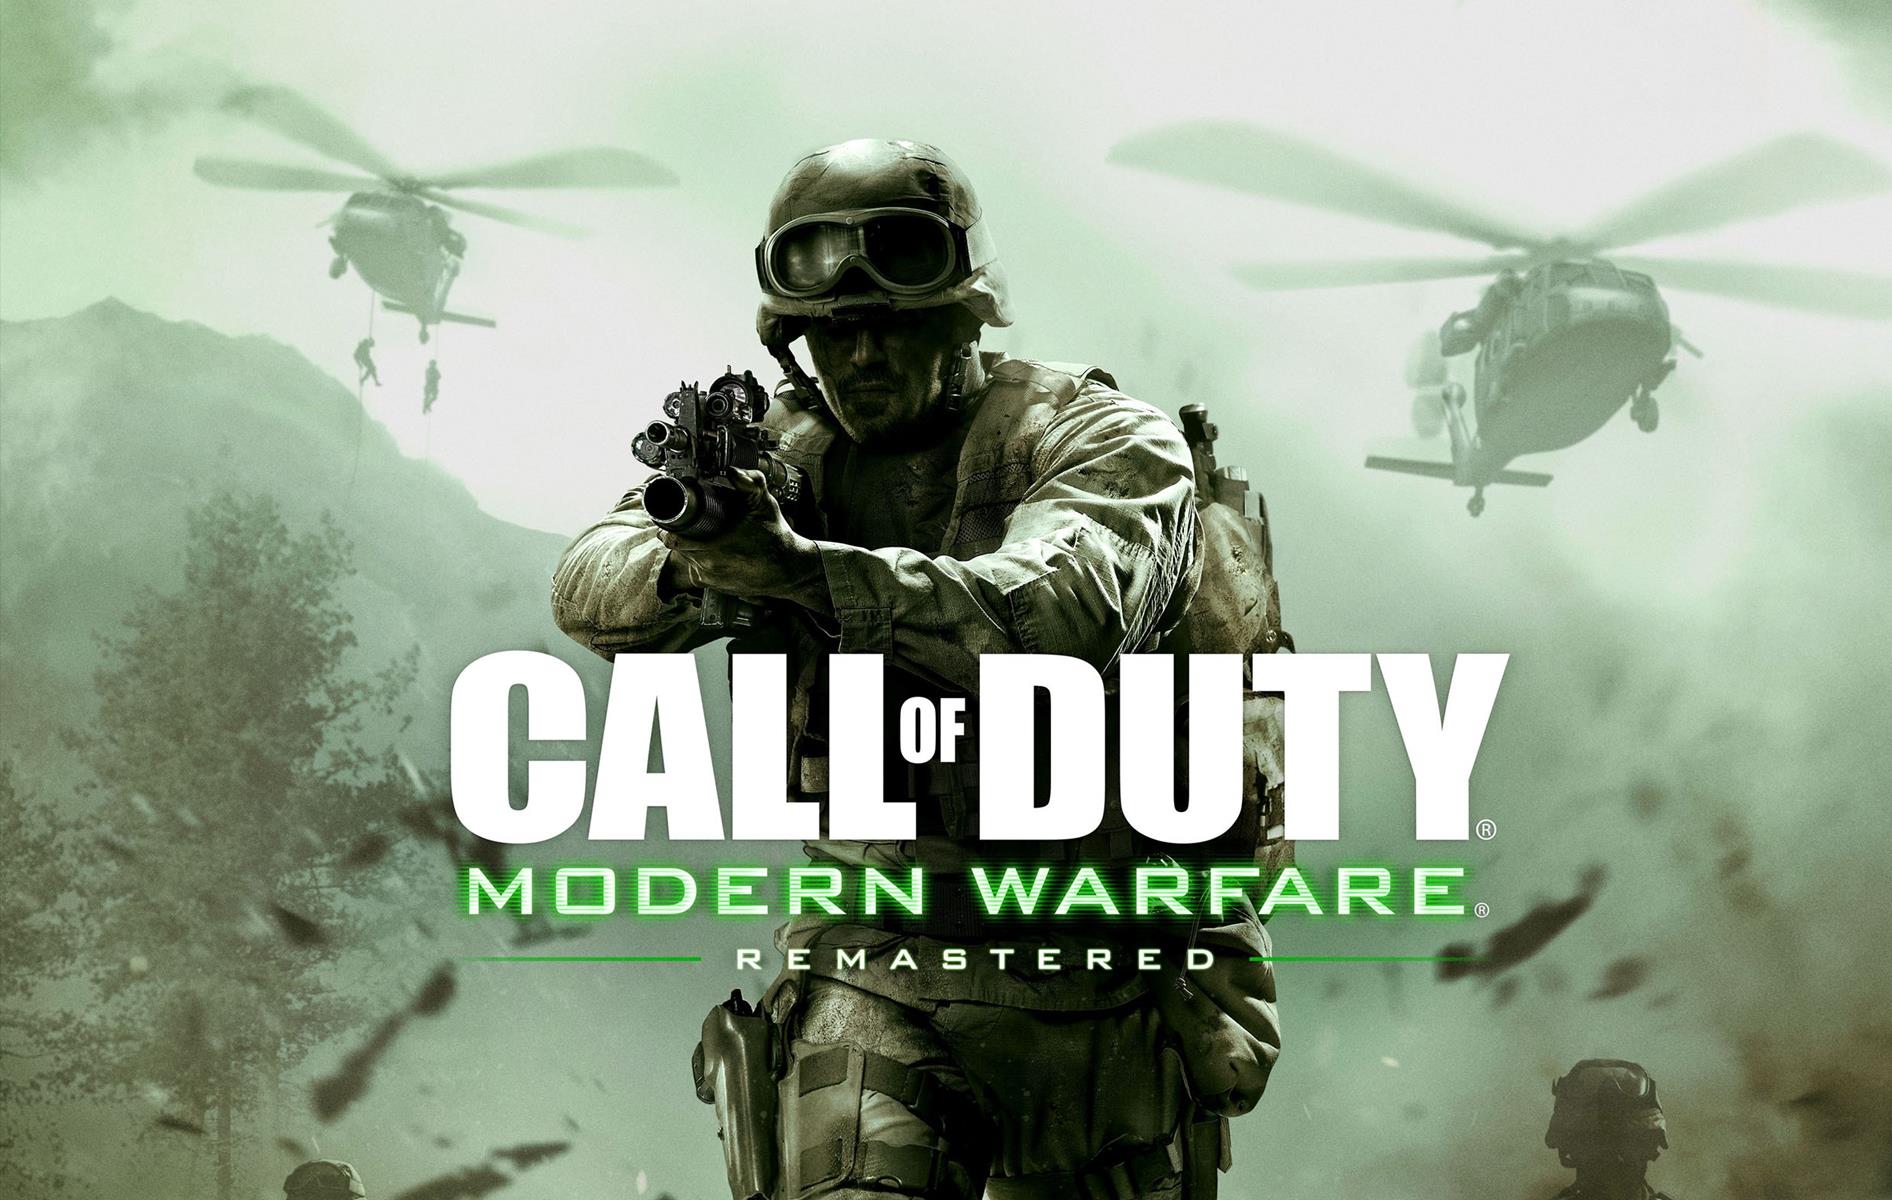 call-of-duty-modern-warfare-remastered-cover-header-1-copy_uahe-1920